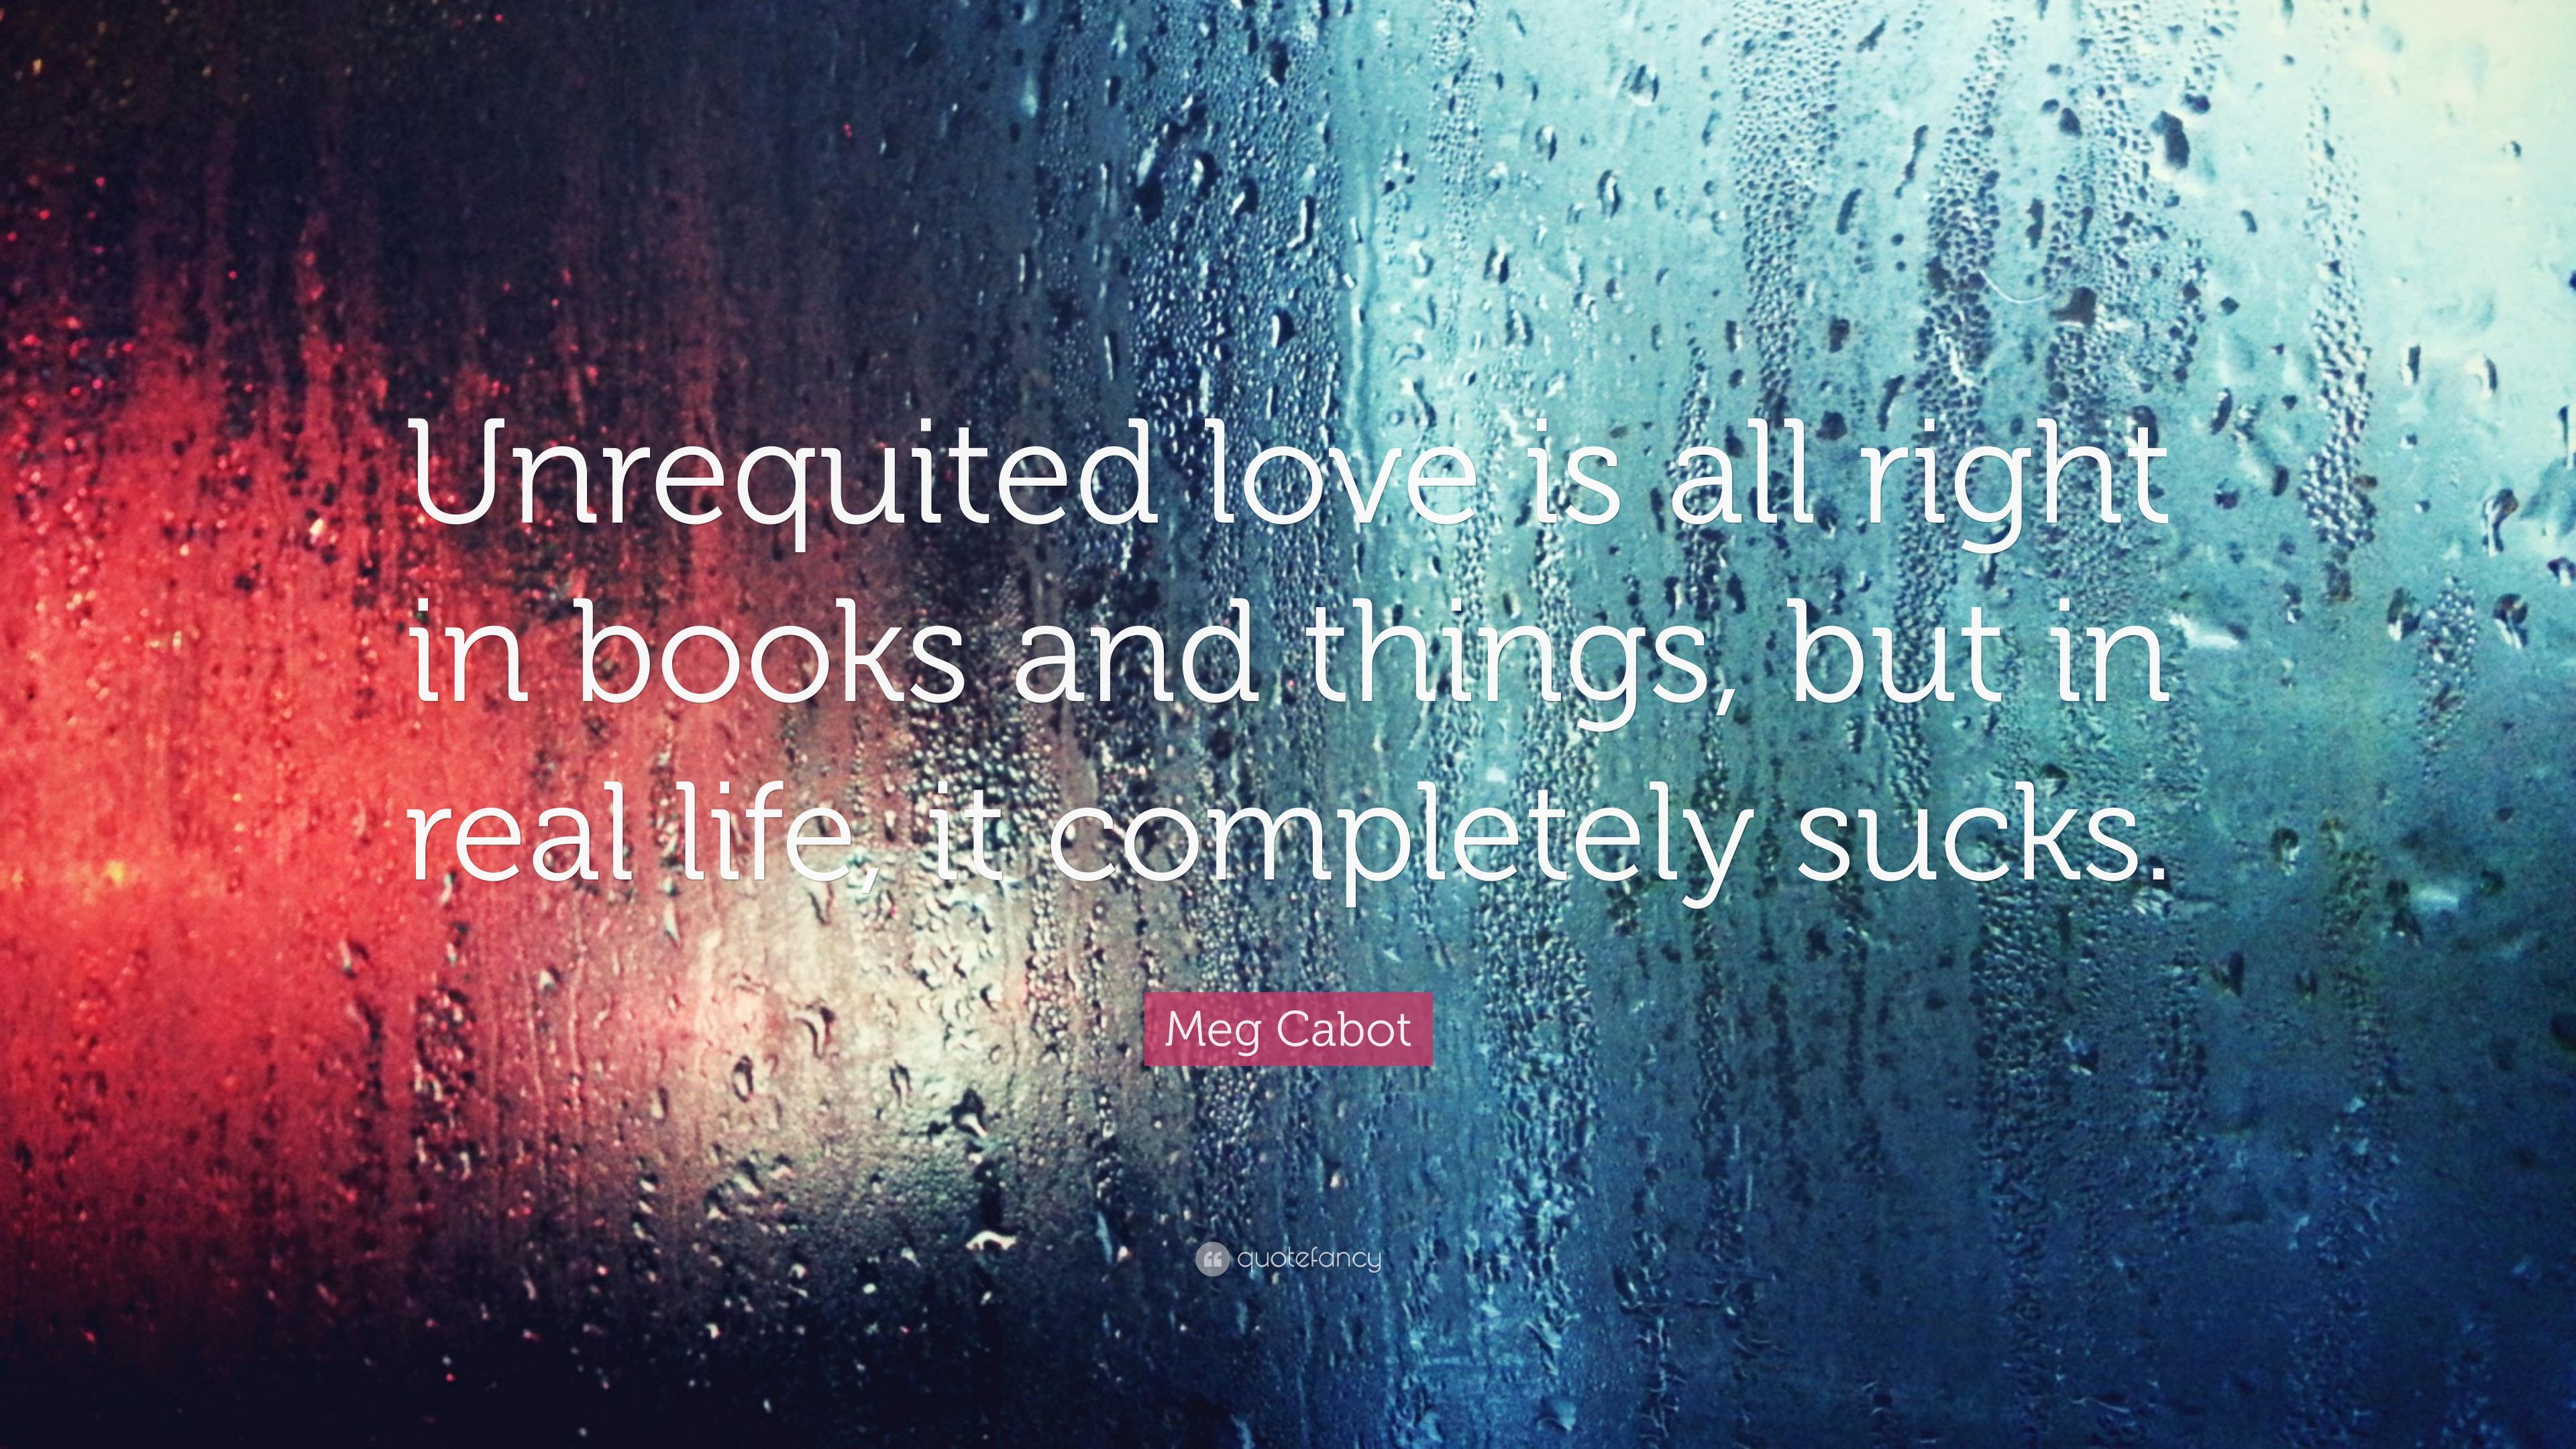 Meg Cabot Quote: “Unrequited love is all right in books